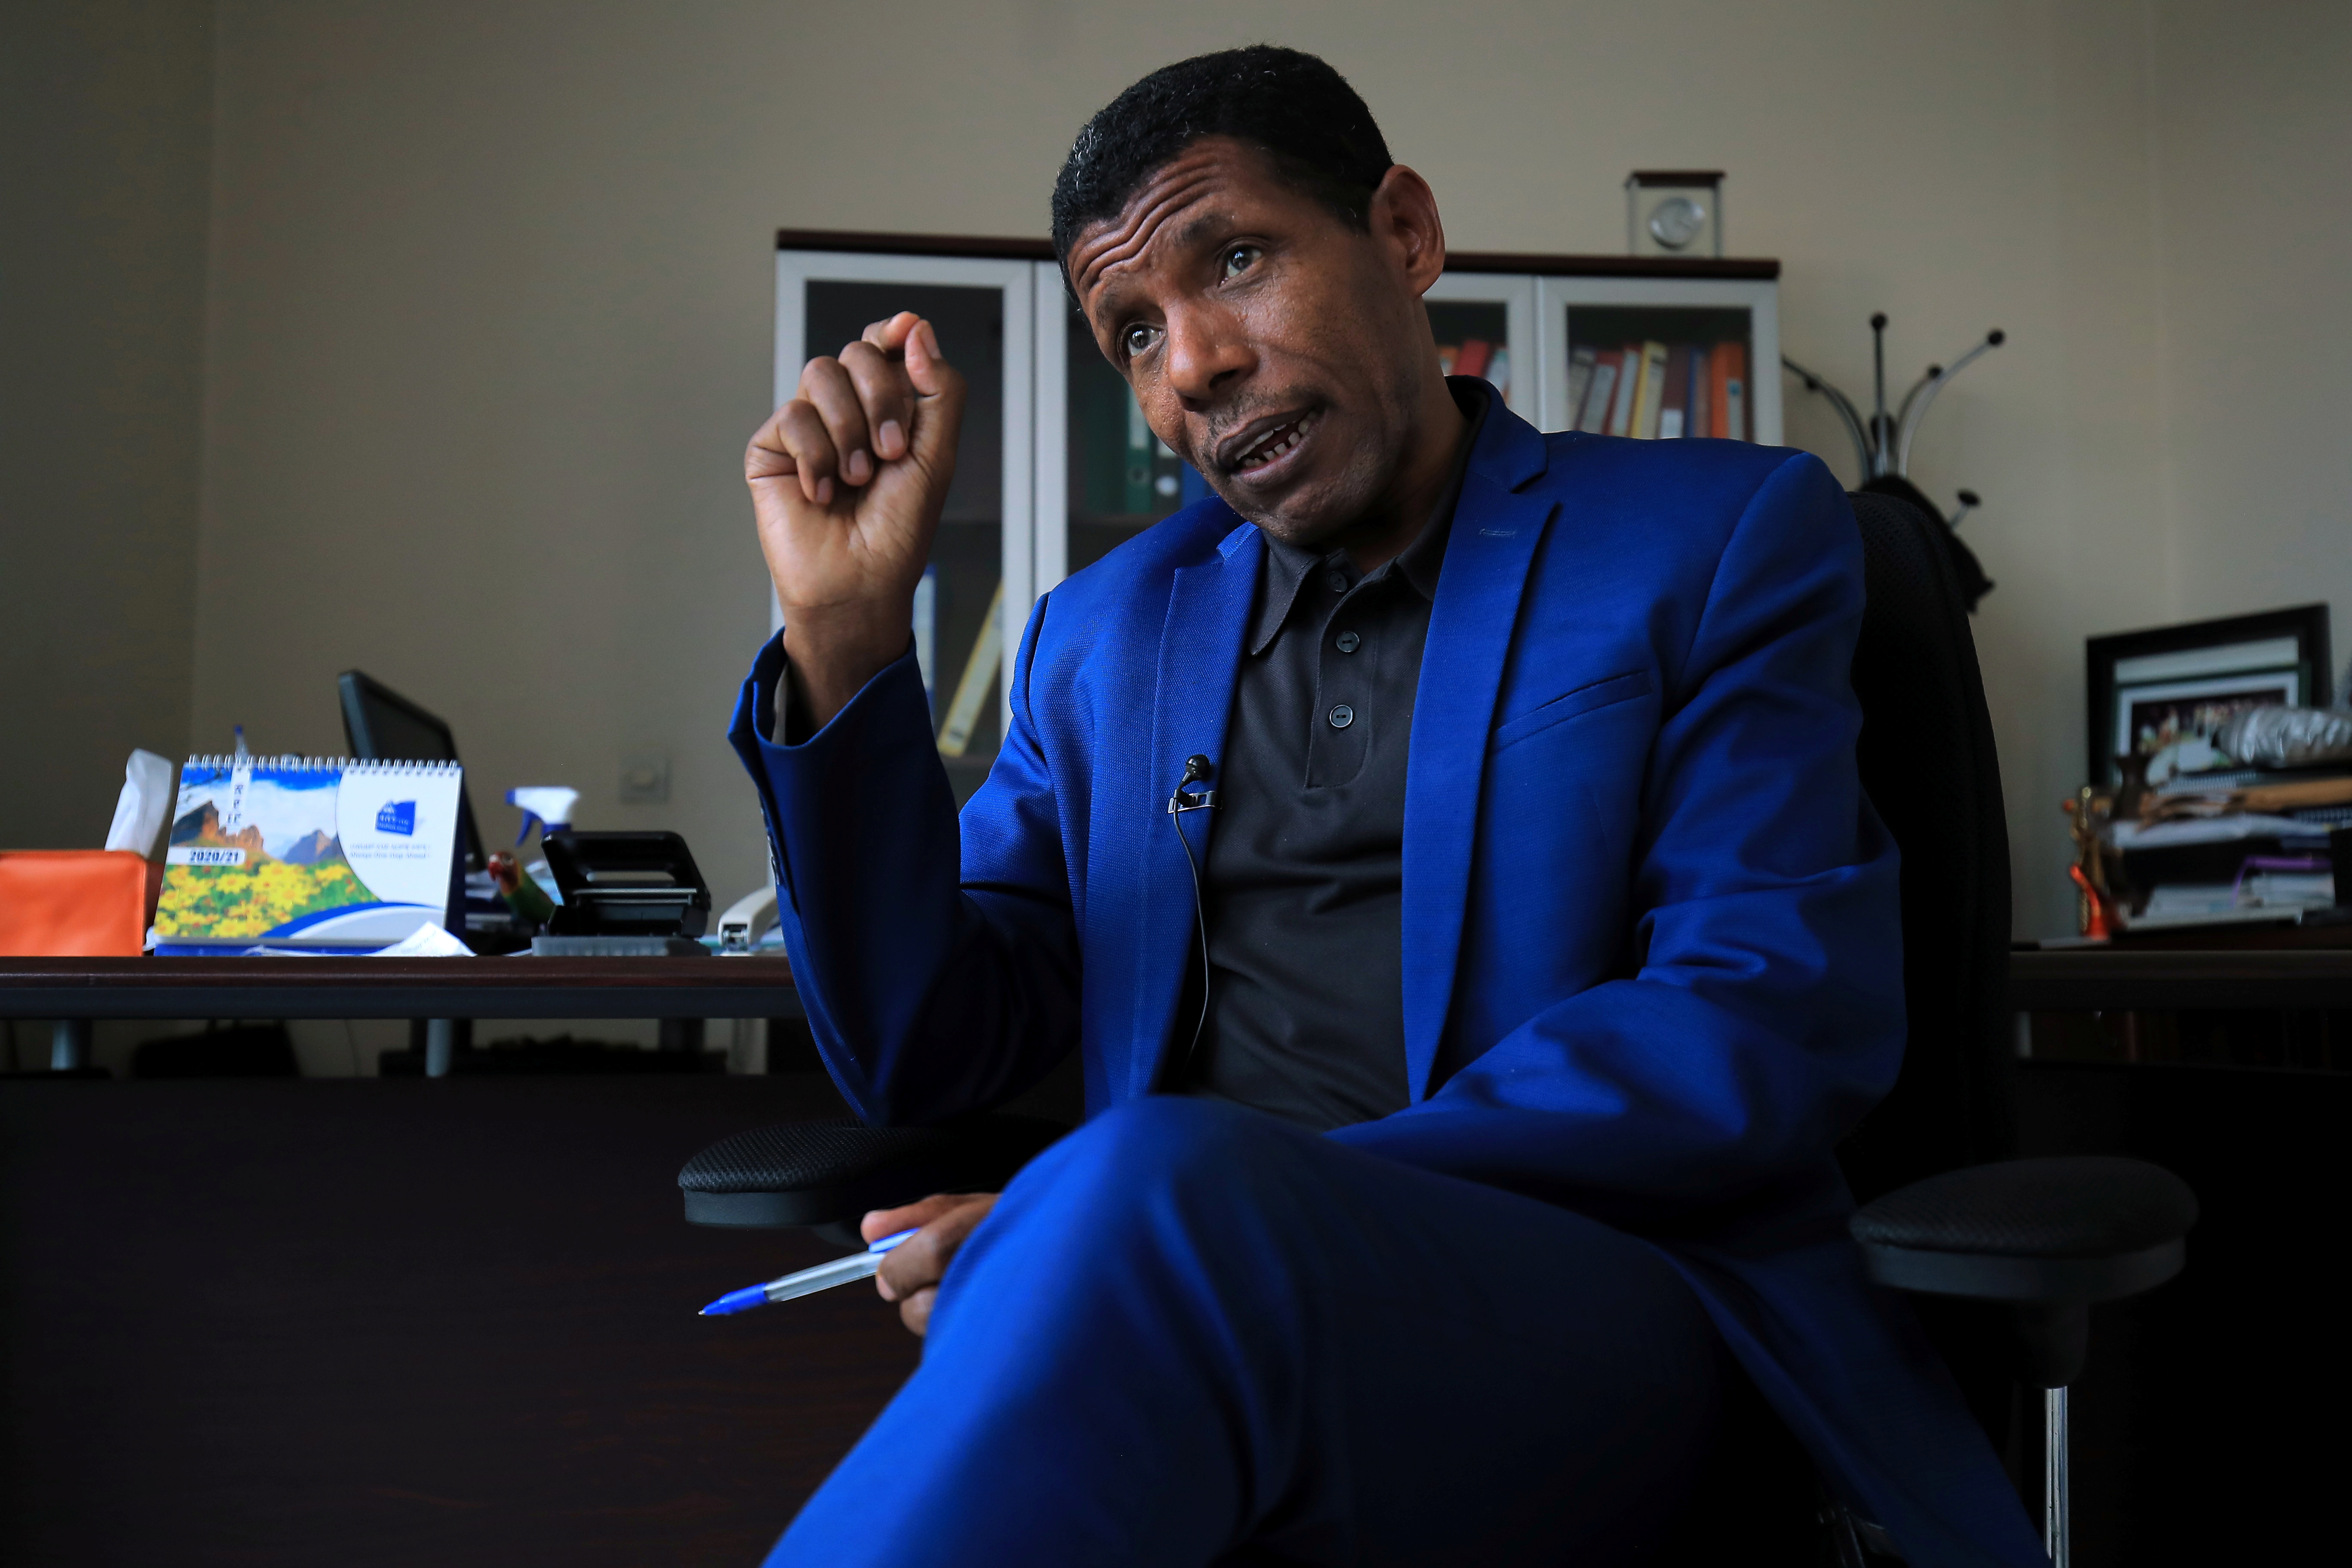 Haile Gebrselassie, Ethiopian Olympic gold medallist and national hero, speaks during a Reuters interview, after pledging to join the fight against rebellious forces, at his office in Addis Ababa, Ethiopia November 24, 2021. REUTERS/Tiksa Negeri